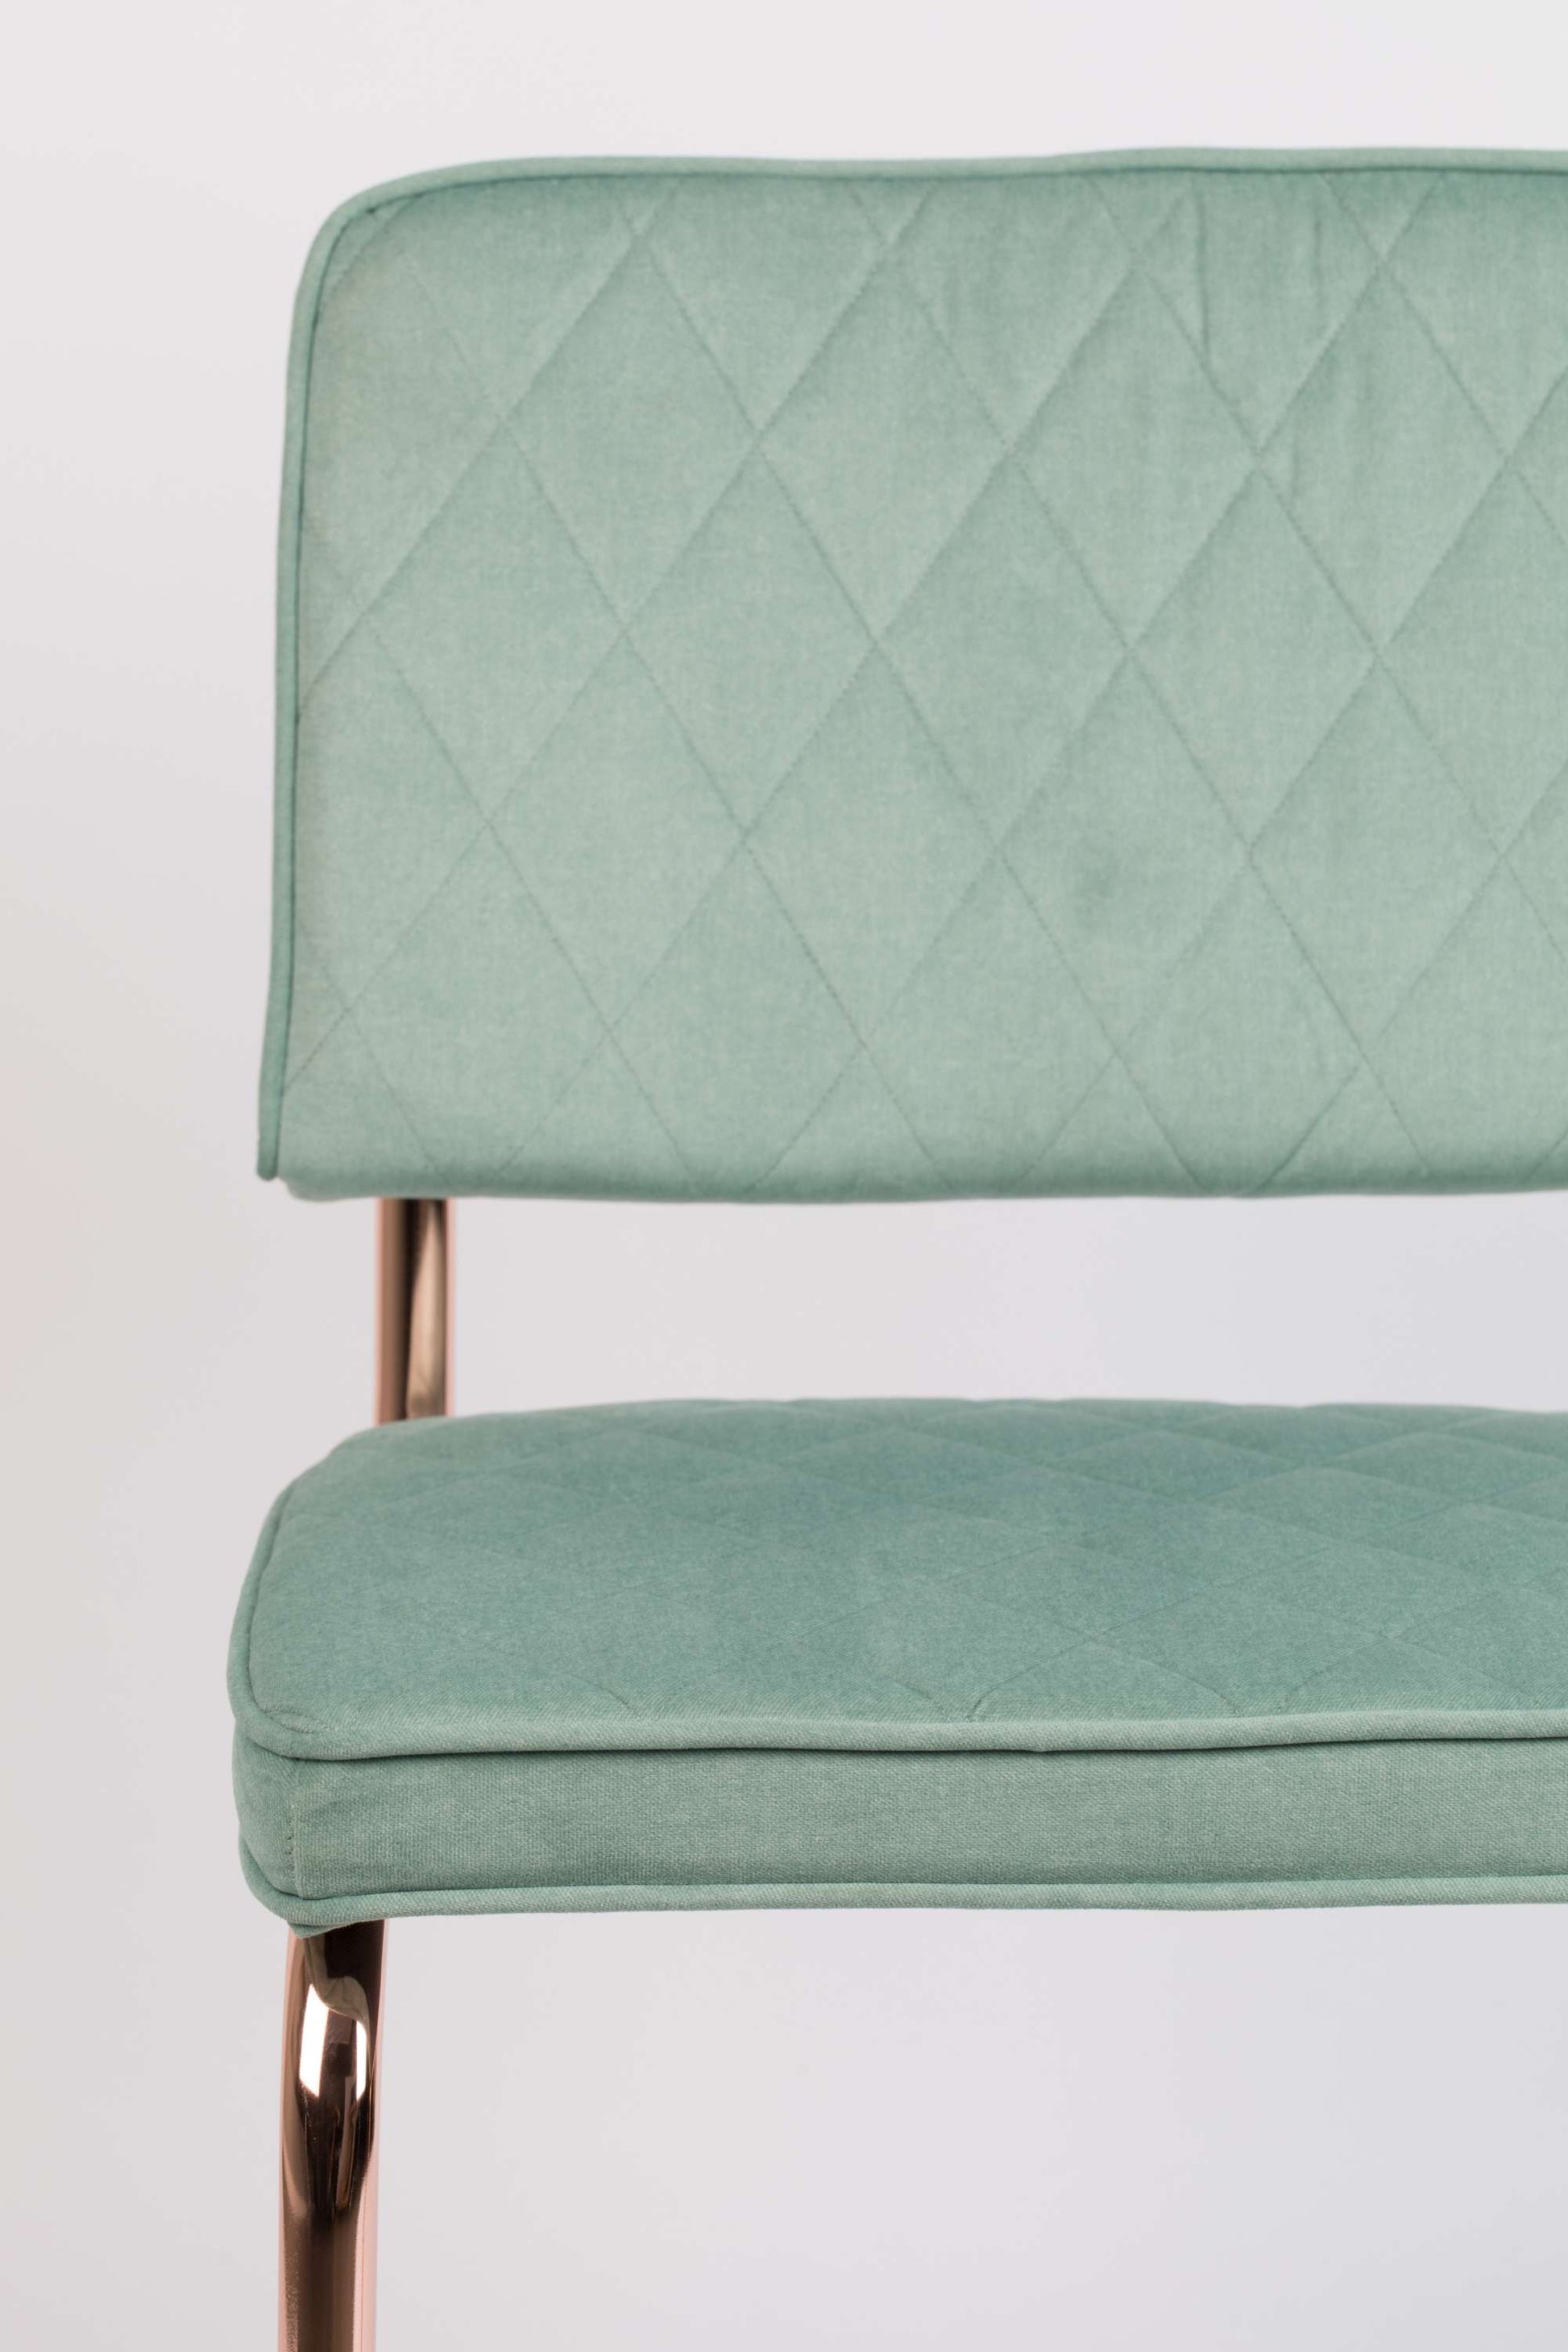 Zuiver | CHAIR DIAMOND MINTY GREEN Default Title